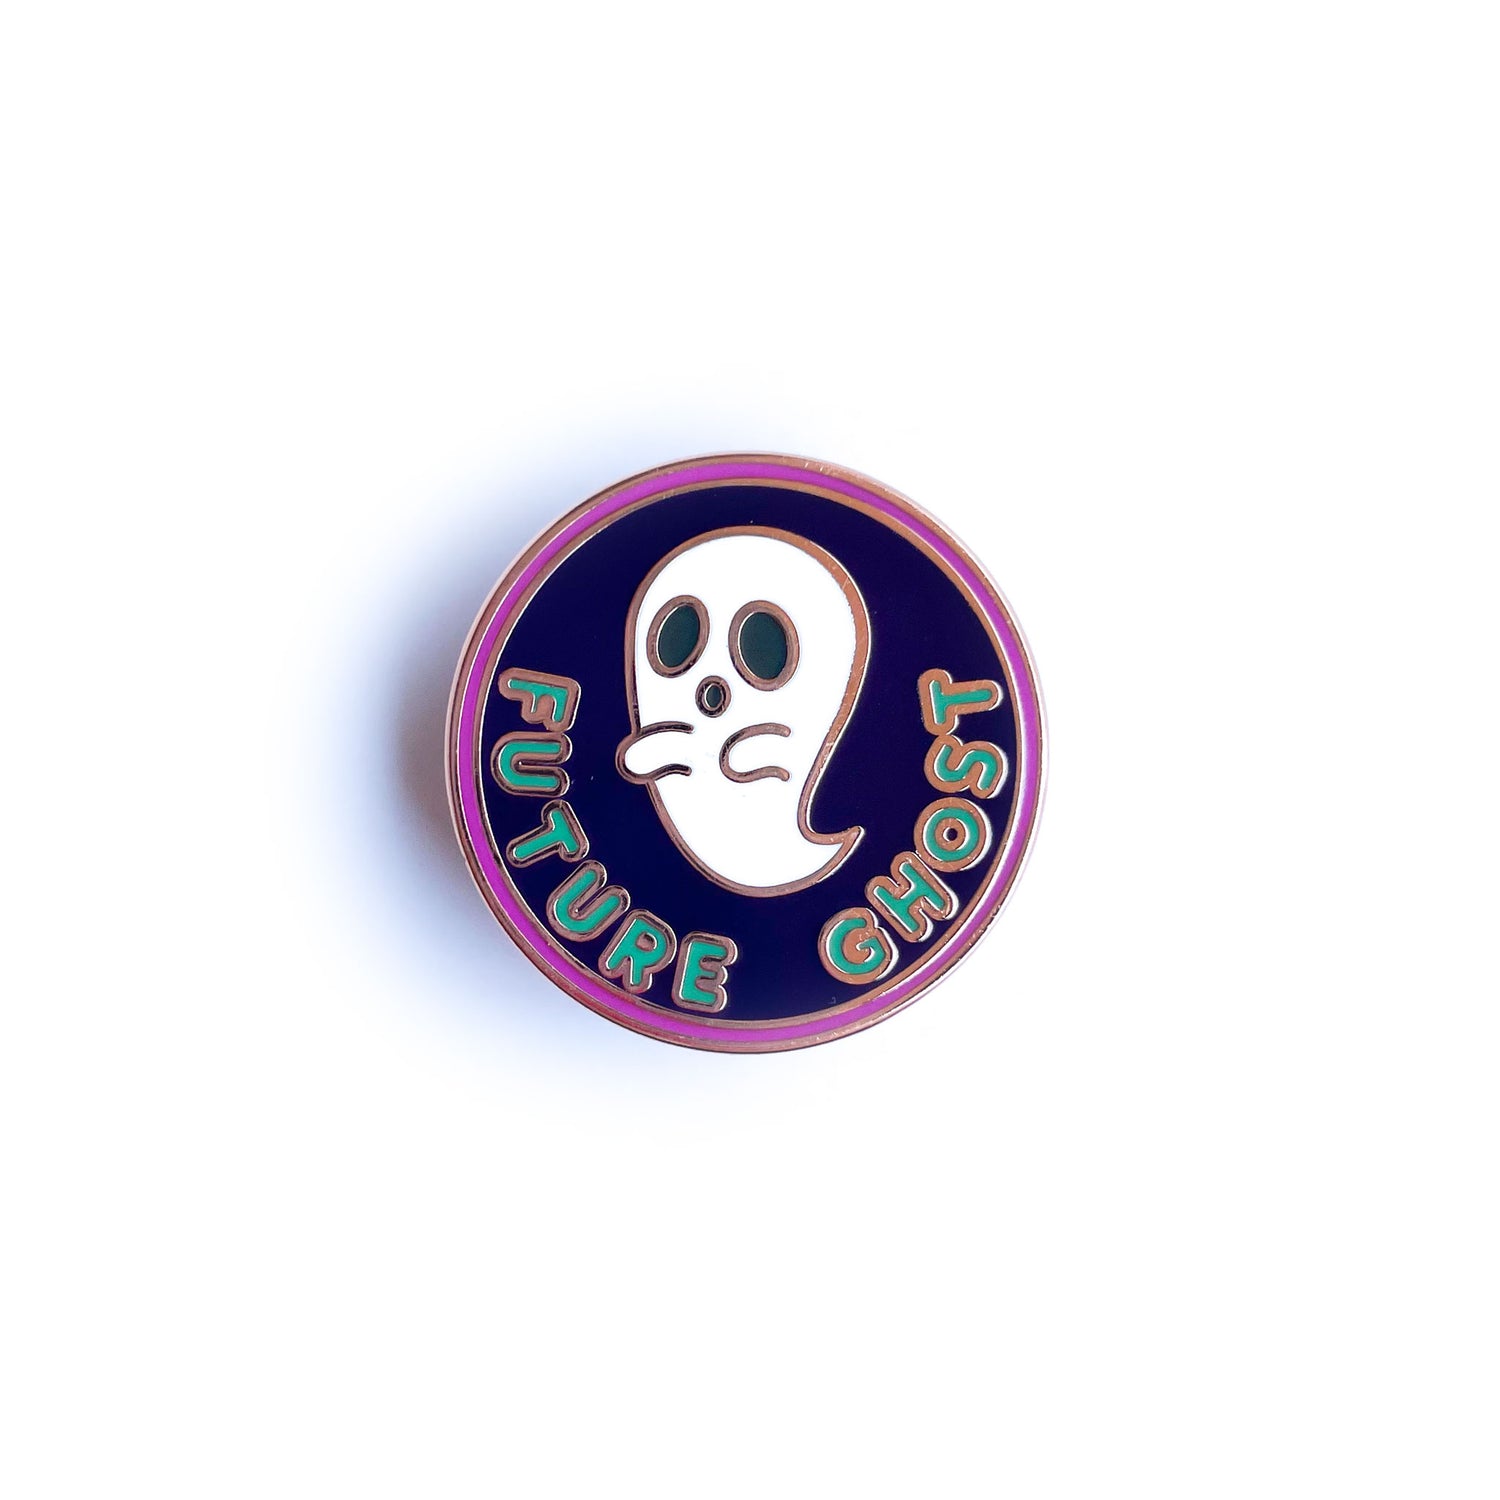 An circular enamel pin with a ghost on it that reads "Future Ghost"